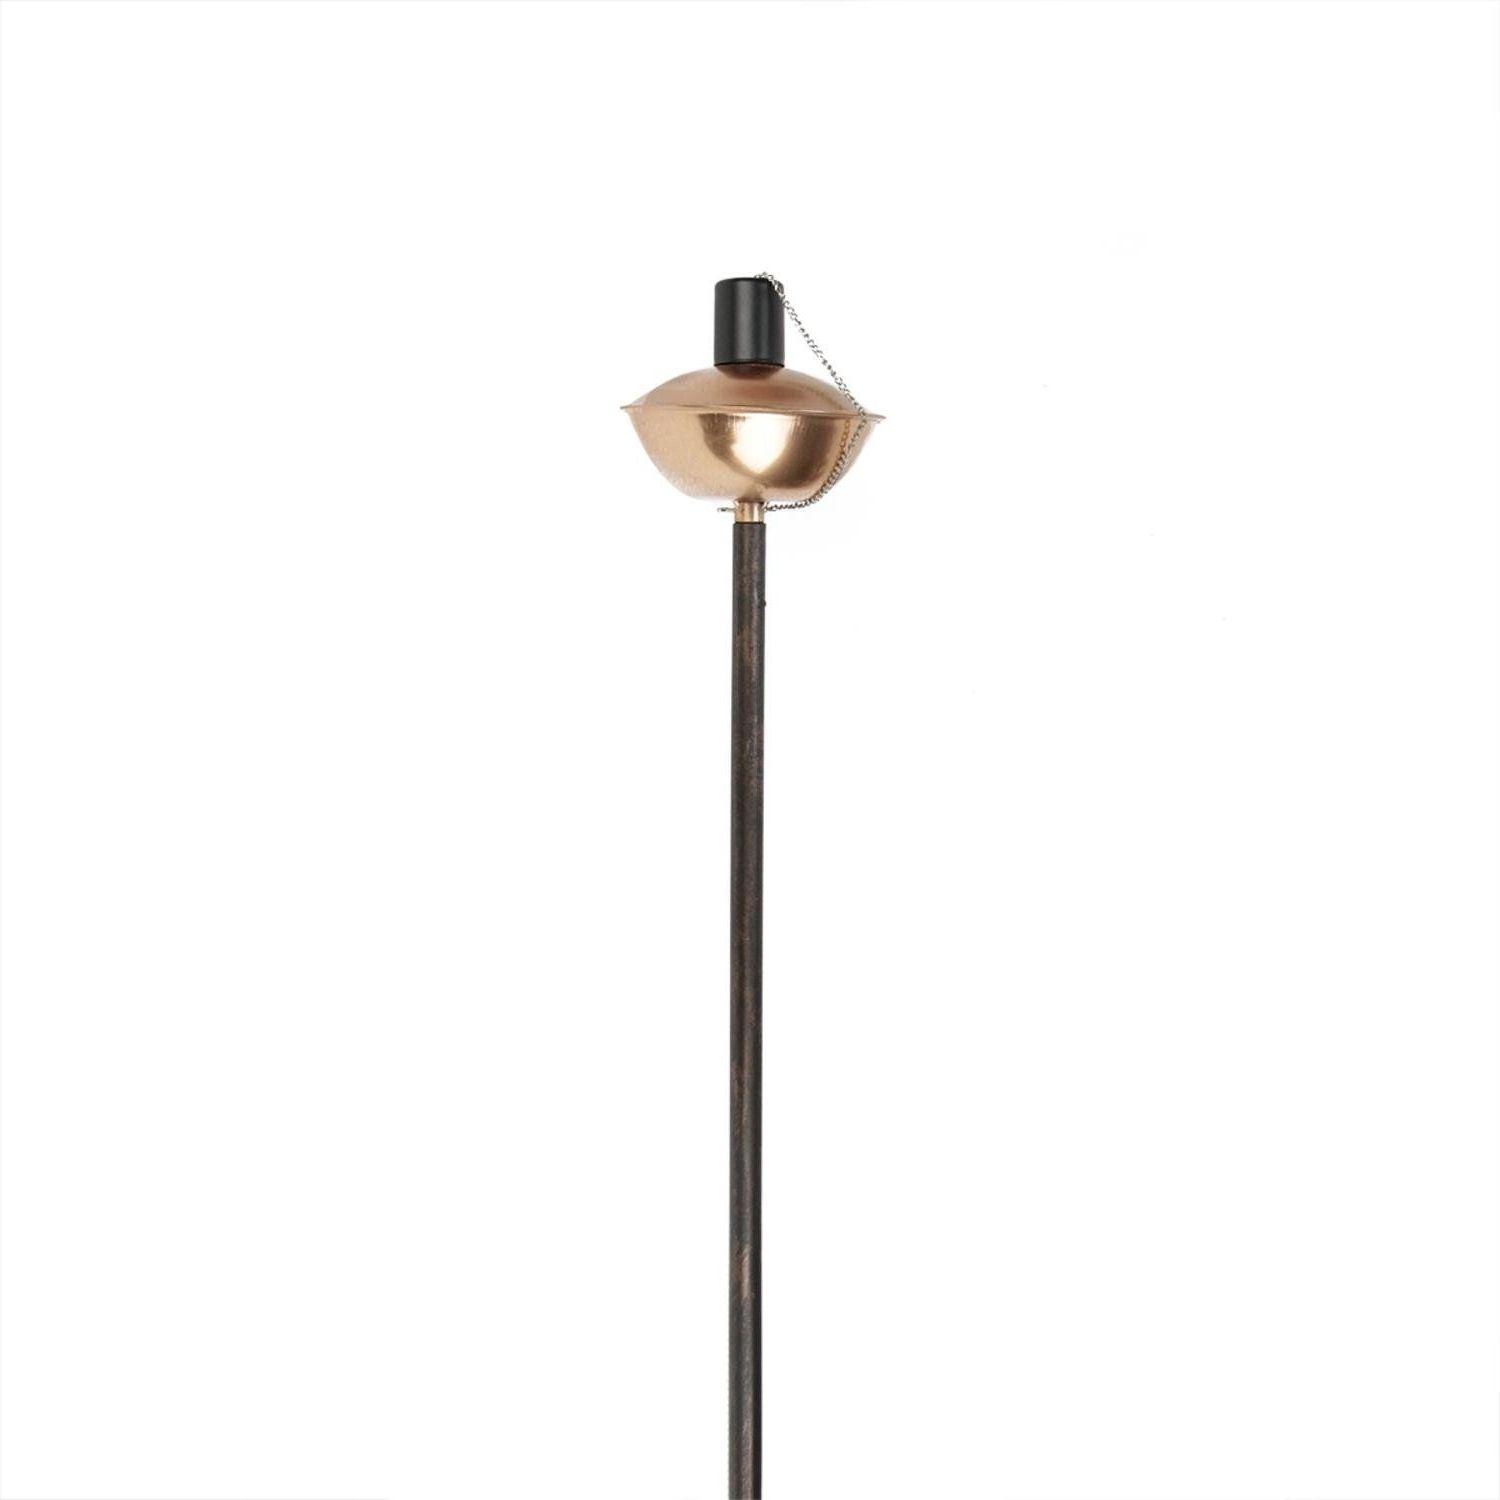 Popular Dak 42' Shiny, Sleek Copper Oil Lamp Outdoor Patio Torch *** To View Intended For Outdoor Oil Lanterns For Patio (View 14 of 20)